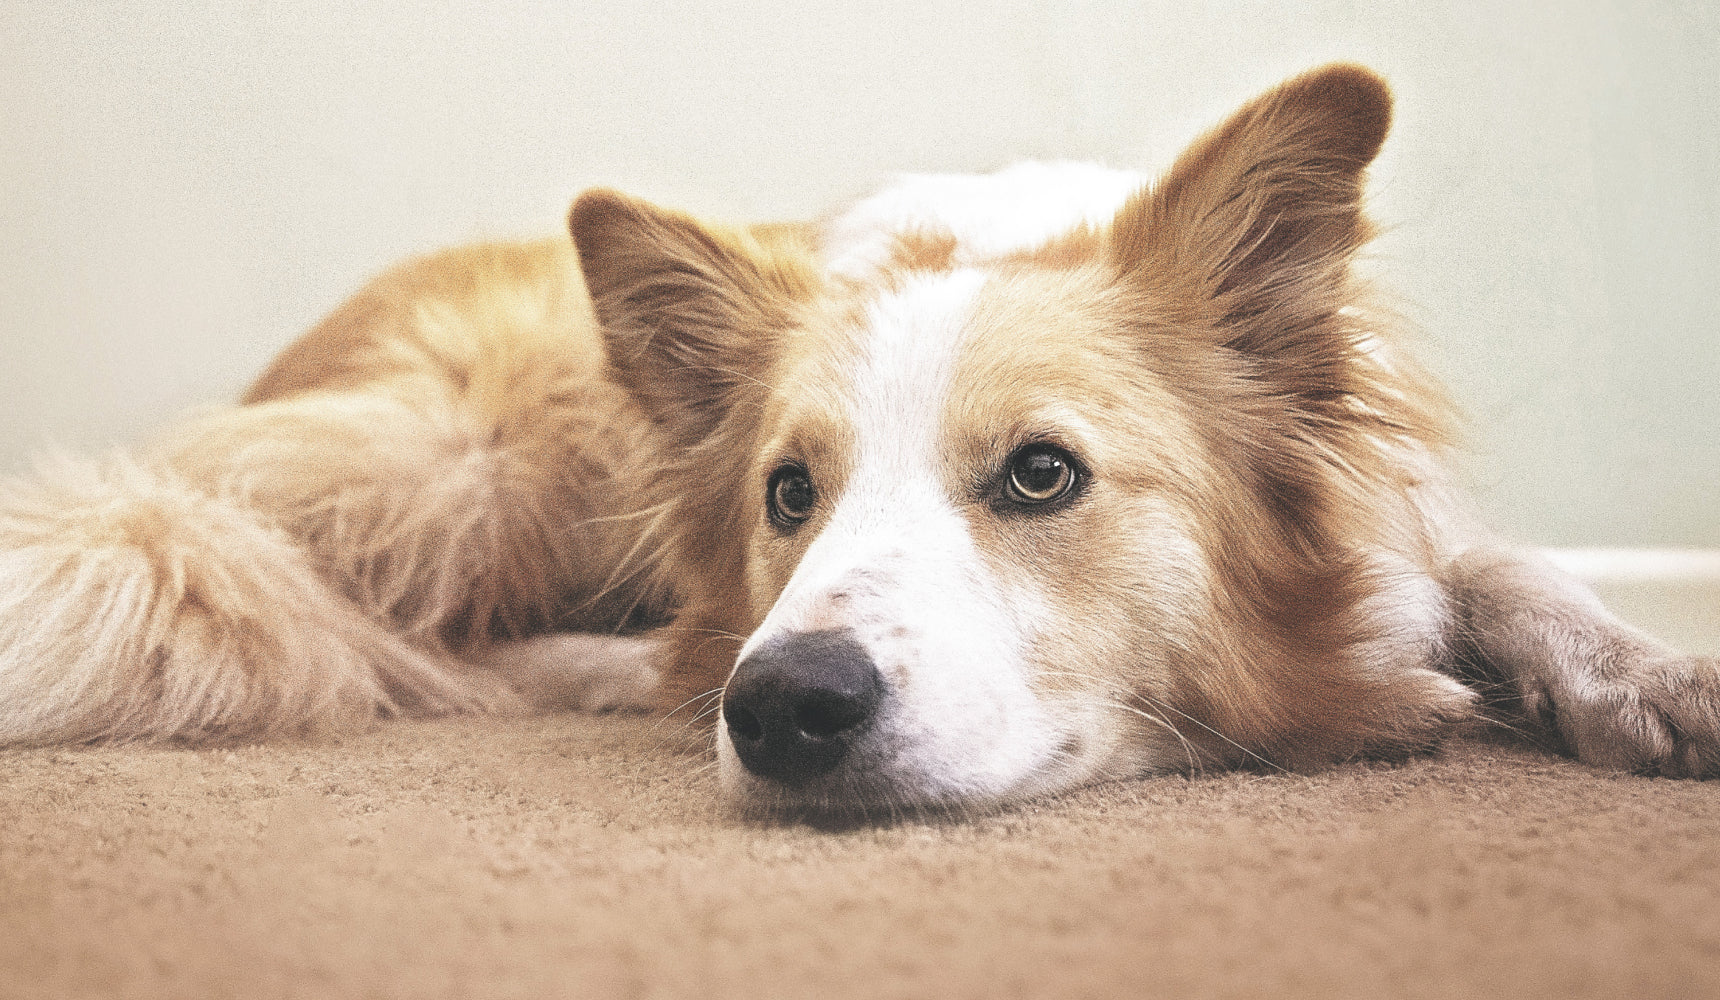 What carpets are best for pets?